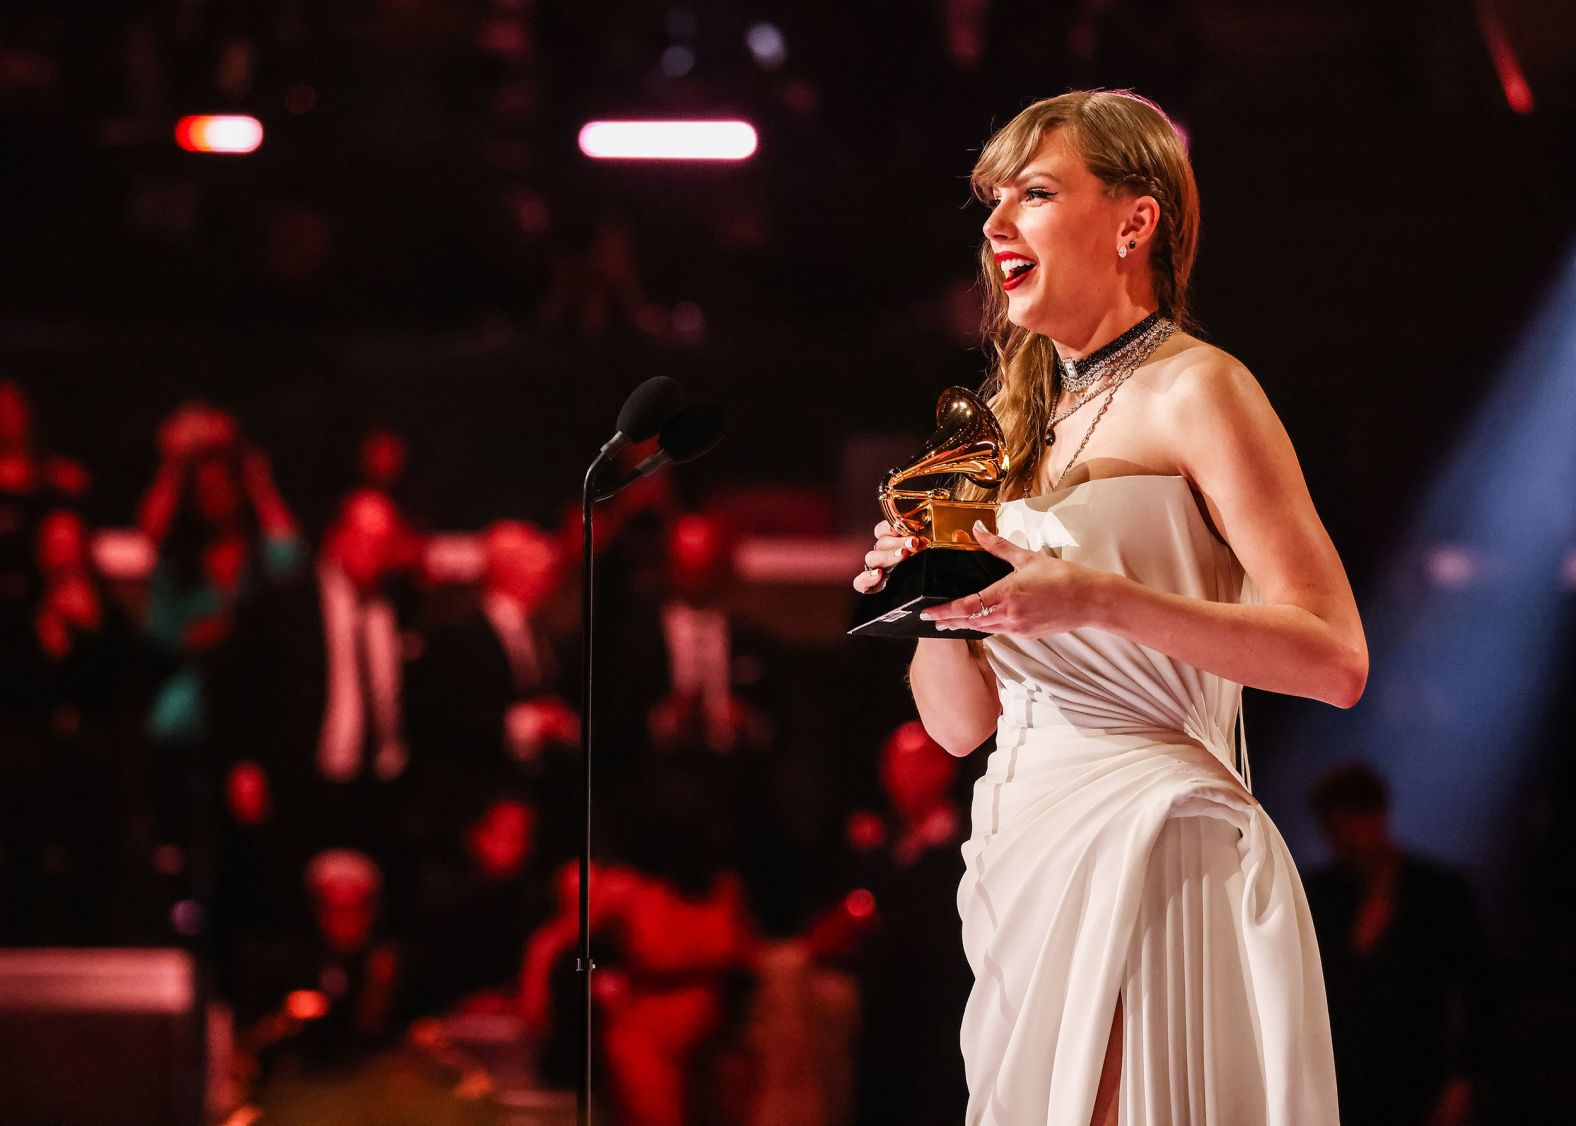 Taylor Swift accepts the Grammy Award for album of the year (“Midnights”) on Sunday, February 4. She is the first artist to win album of the year four times. <a href="index.php?page=&url=https%3A%2F%2Fwww.cnn.com%2F2024%2F02%2F04%2Fentertainment%2Fgallery%2Fgrammy-awards-2024%2Findex.html">See more photos from the Grammys</a>.